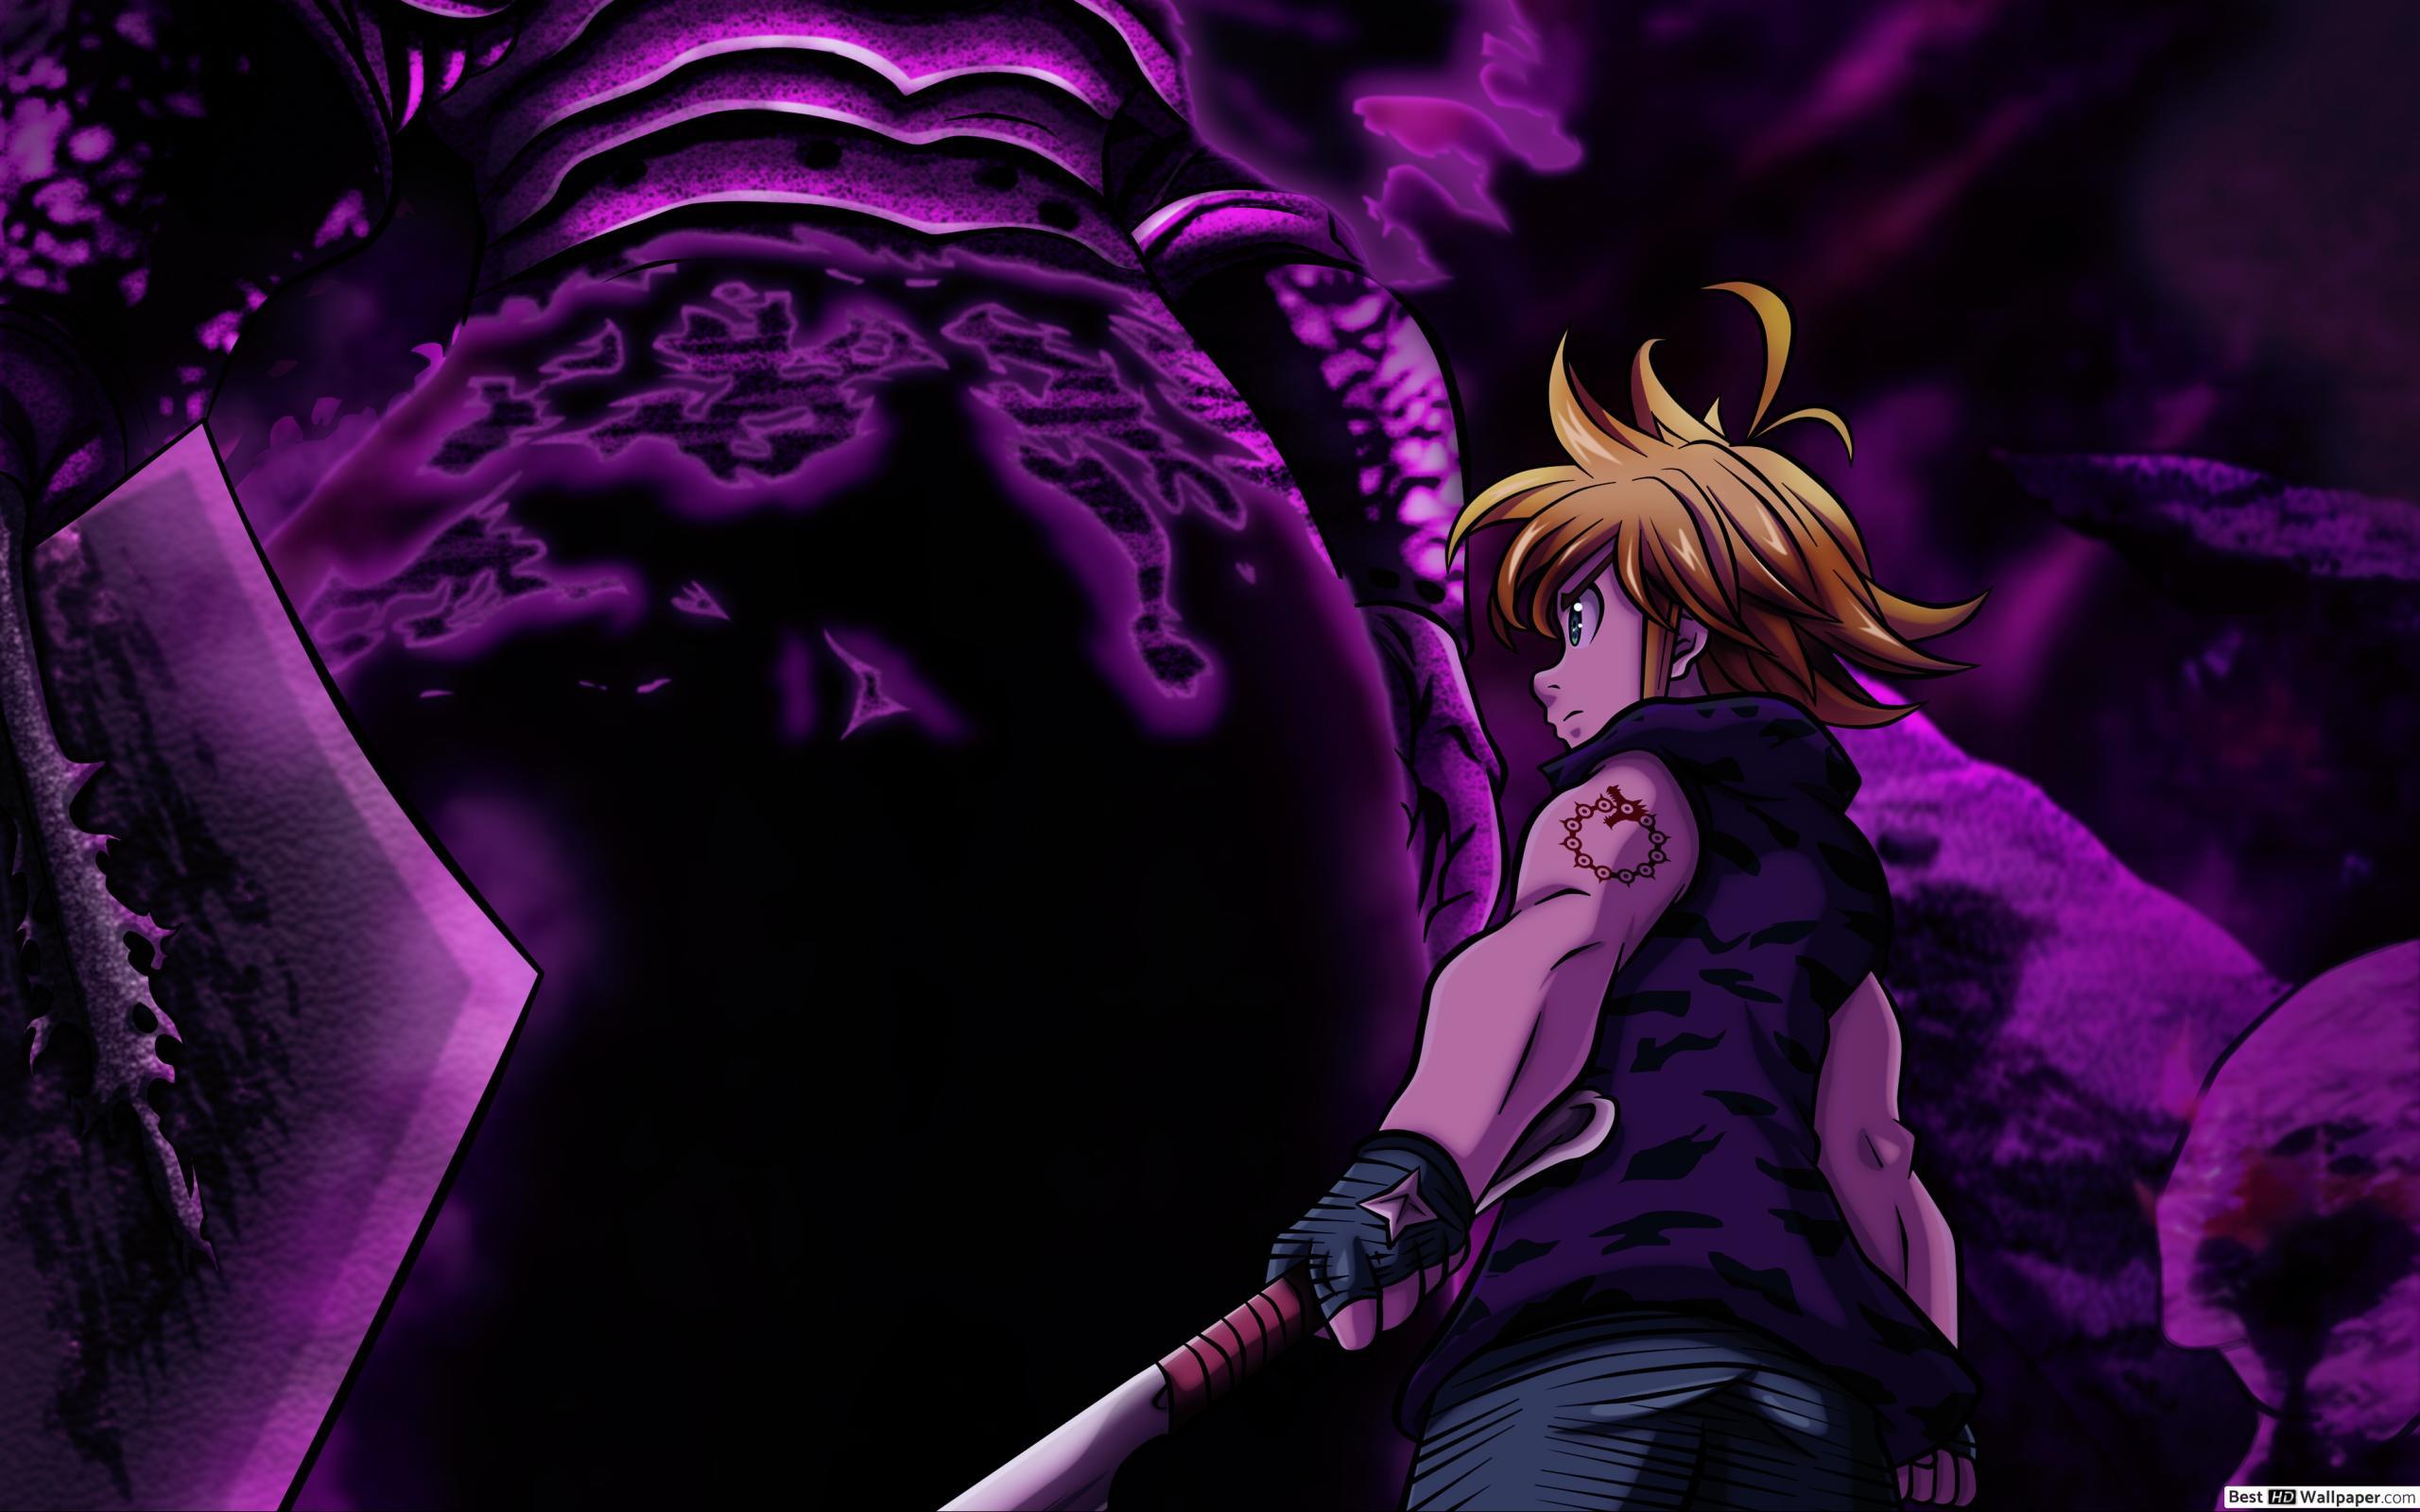 MELIODAS SATE SATE SATE MANY TIMES by soud1246 Sound Effect